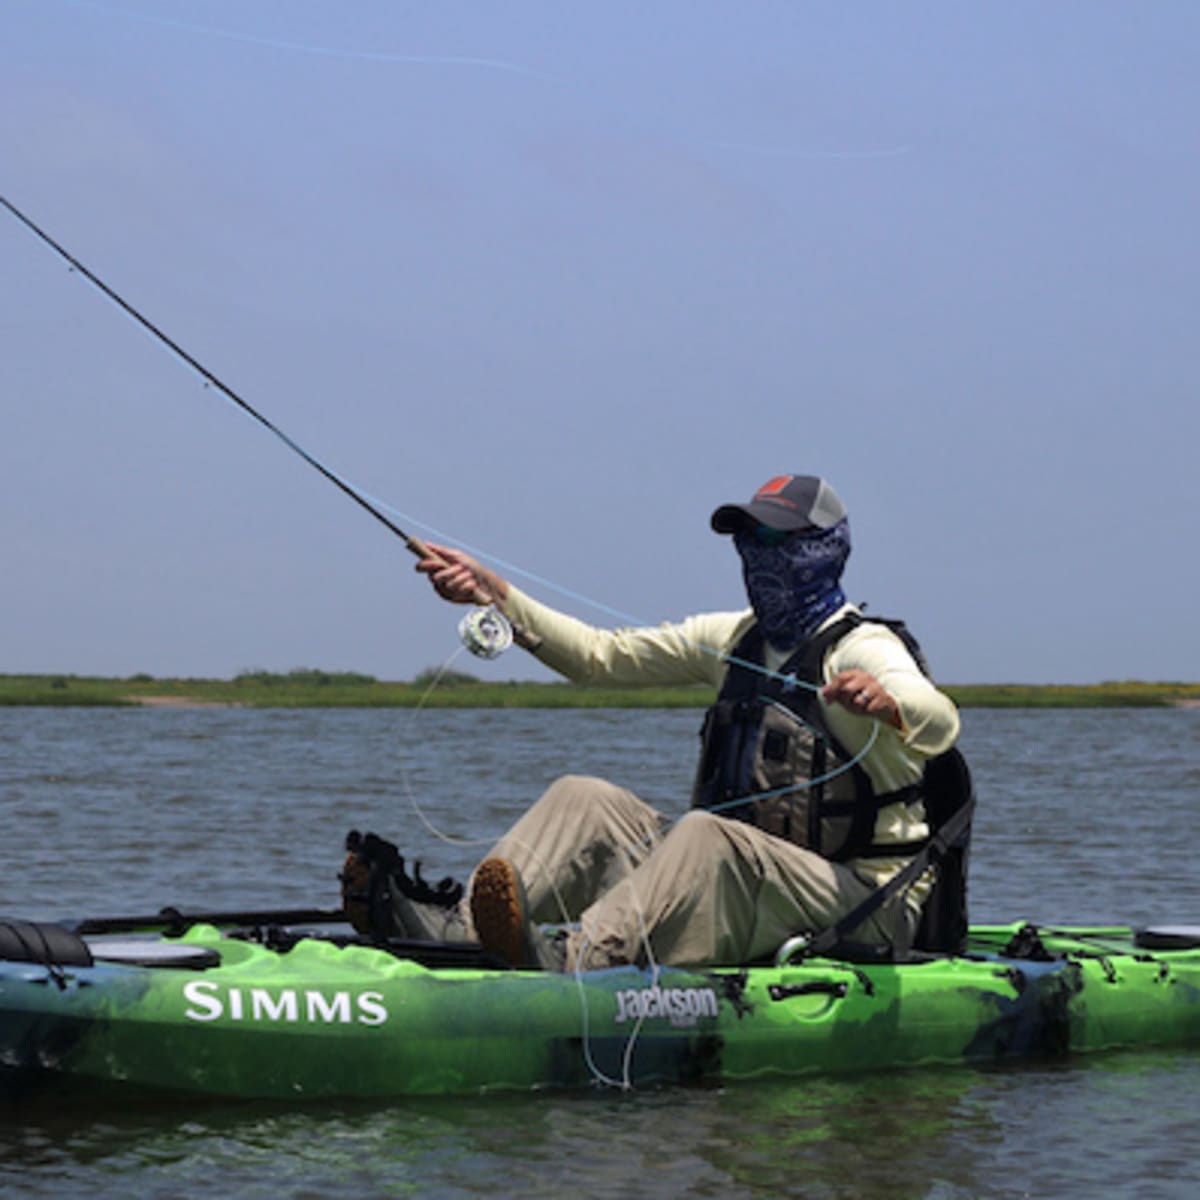 How to manage fly line while fishing from a kayak. - Men's Journal